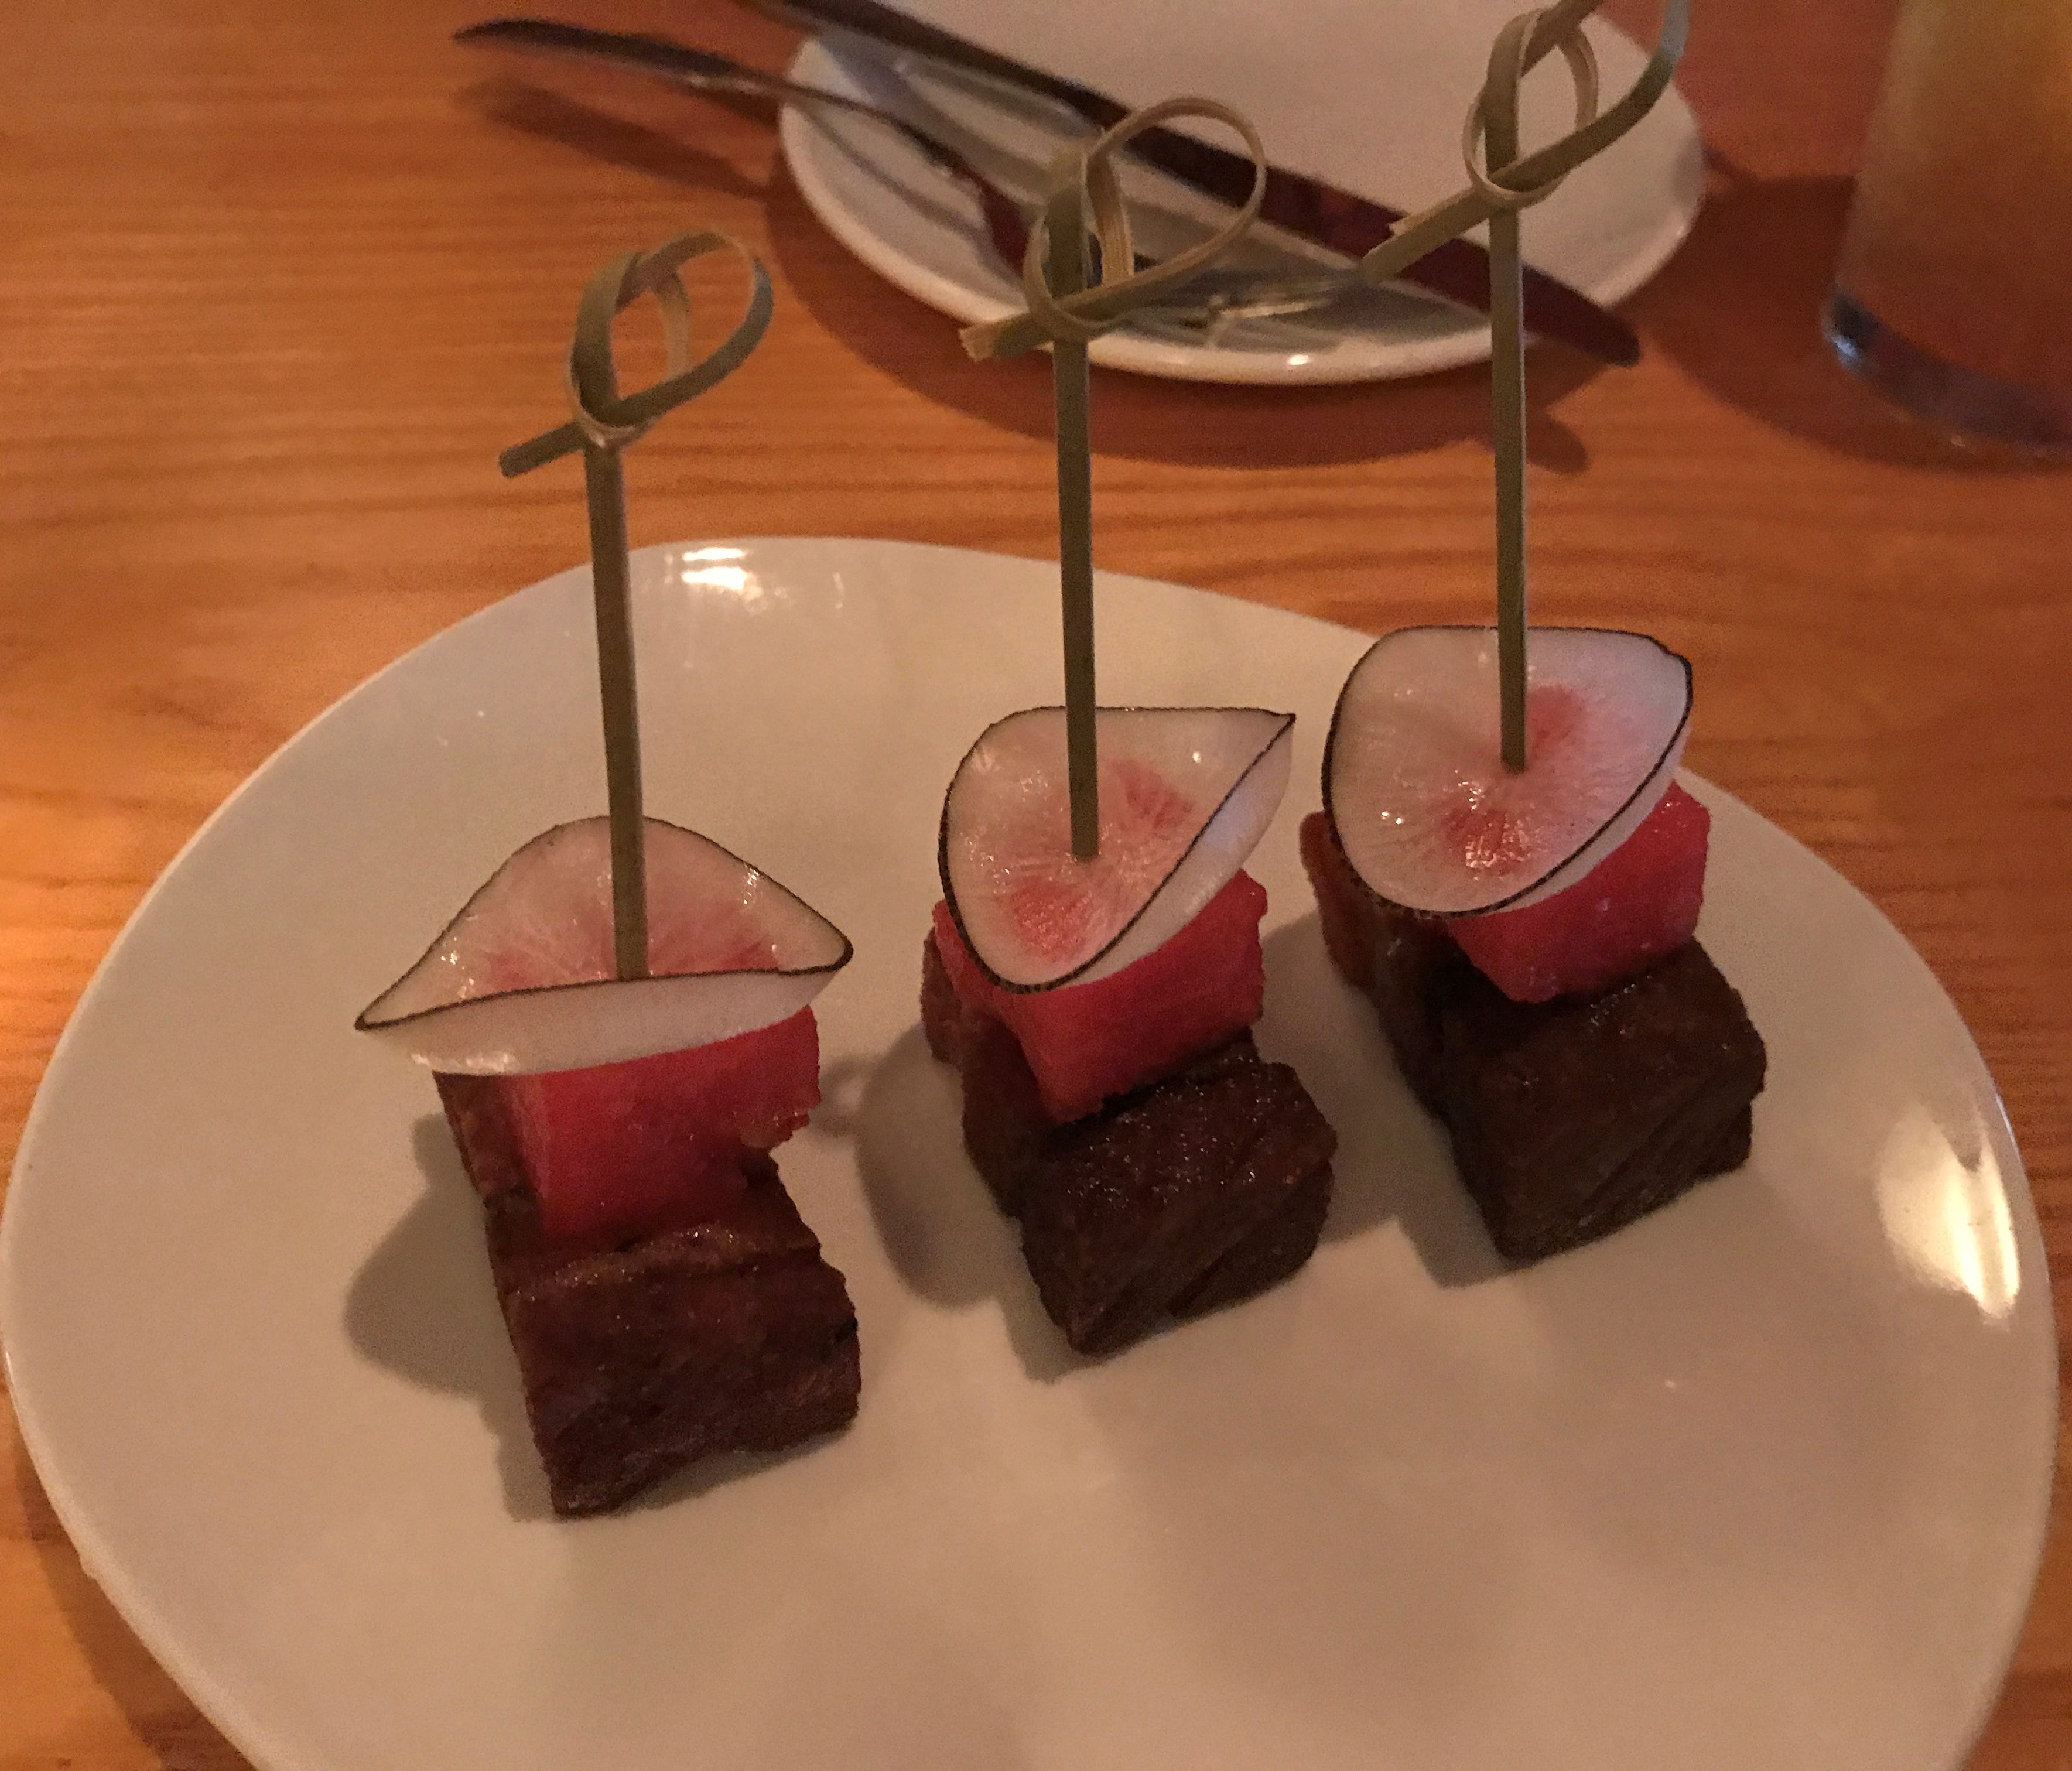 The signature dish is lacquered pork belly bites with radish and watermelon.